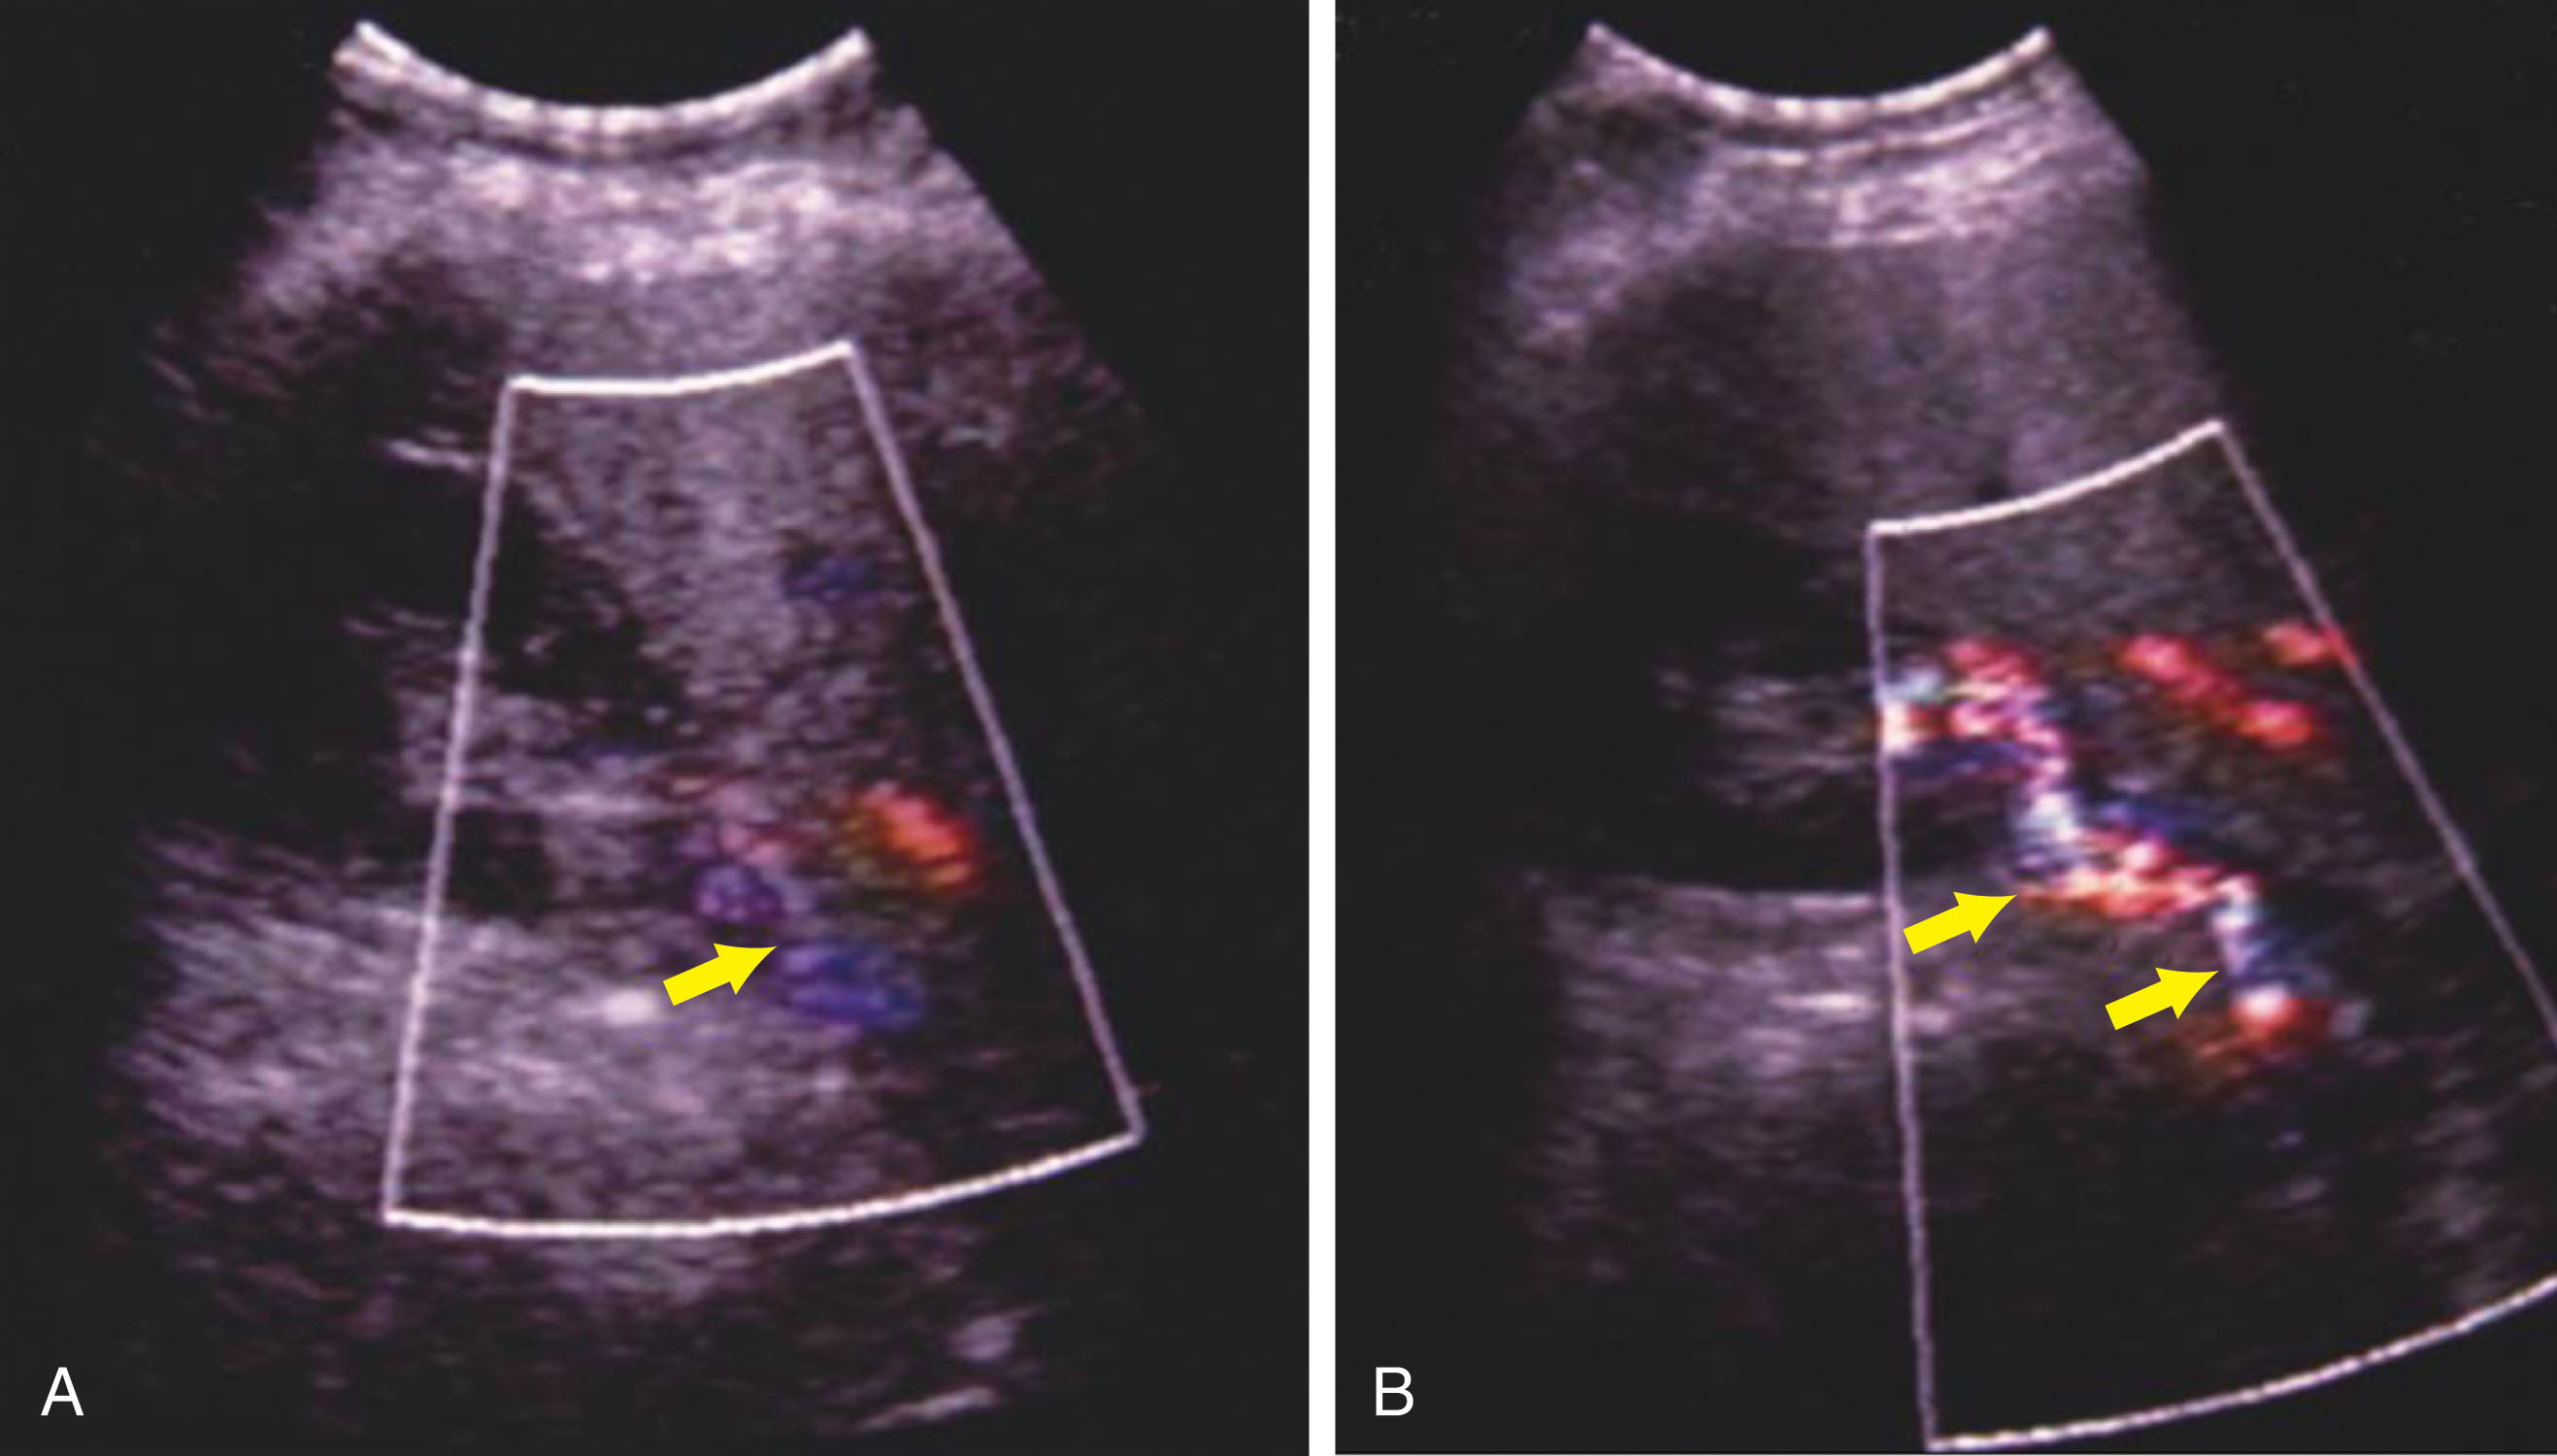 Fig. 17.1, Color Doppler imaging of a patient’s right renal artery before (A) and after (B) administration of a vascular ultrasound contrast agent. Note the increased visualization of flow in the renal artery ( arrows ) after intravenous injection of contrast. In this case, no vascular abnormality was detected.